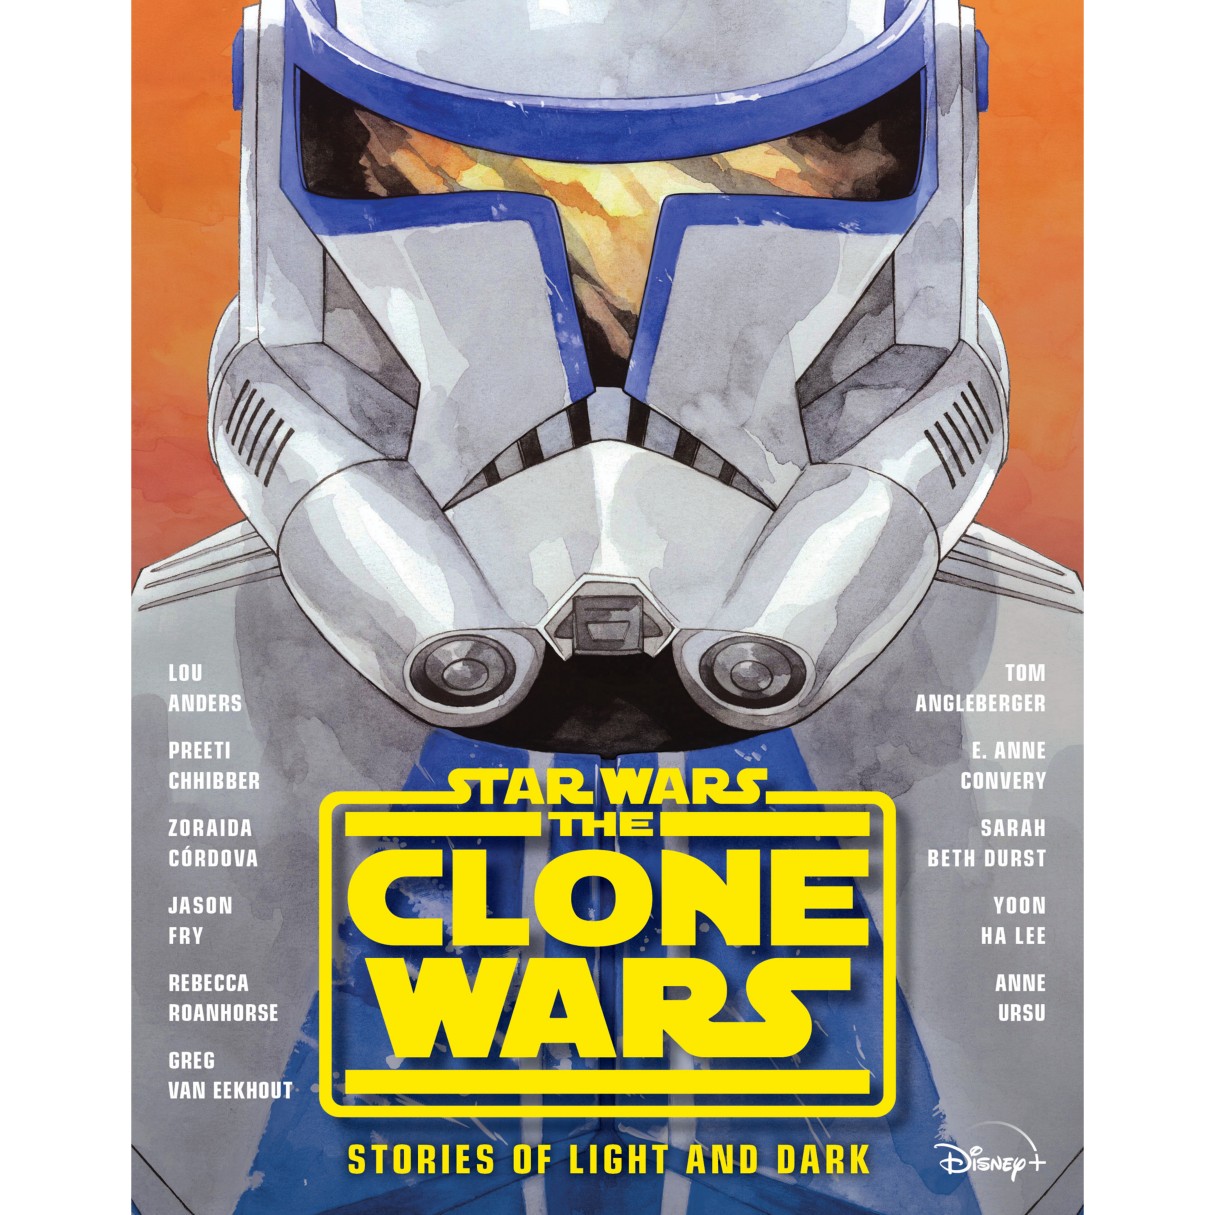 Star Wars The Clone Wars: Stories of Light and Dark Book